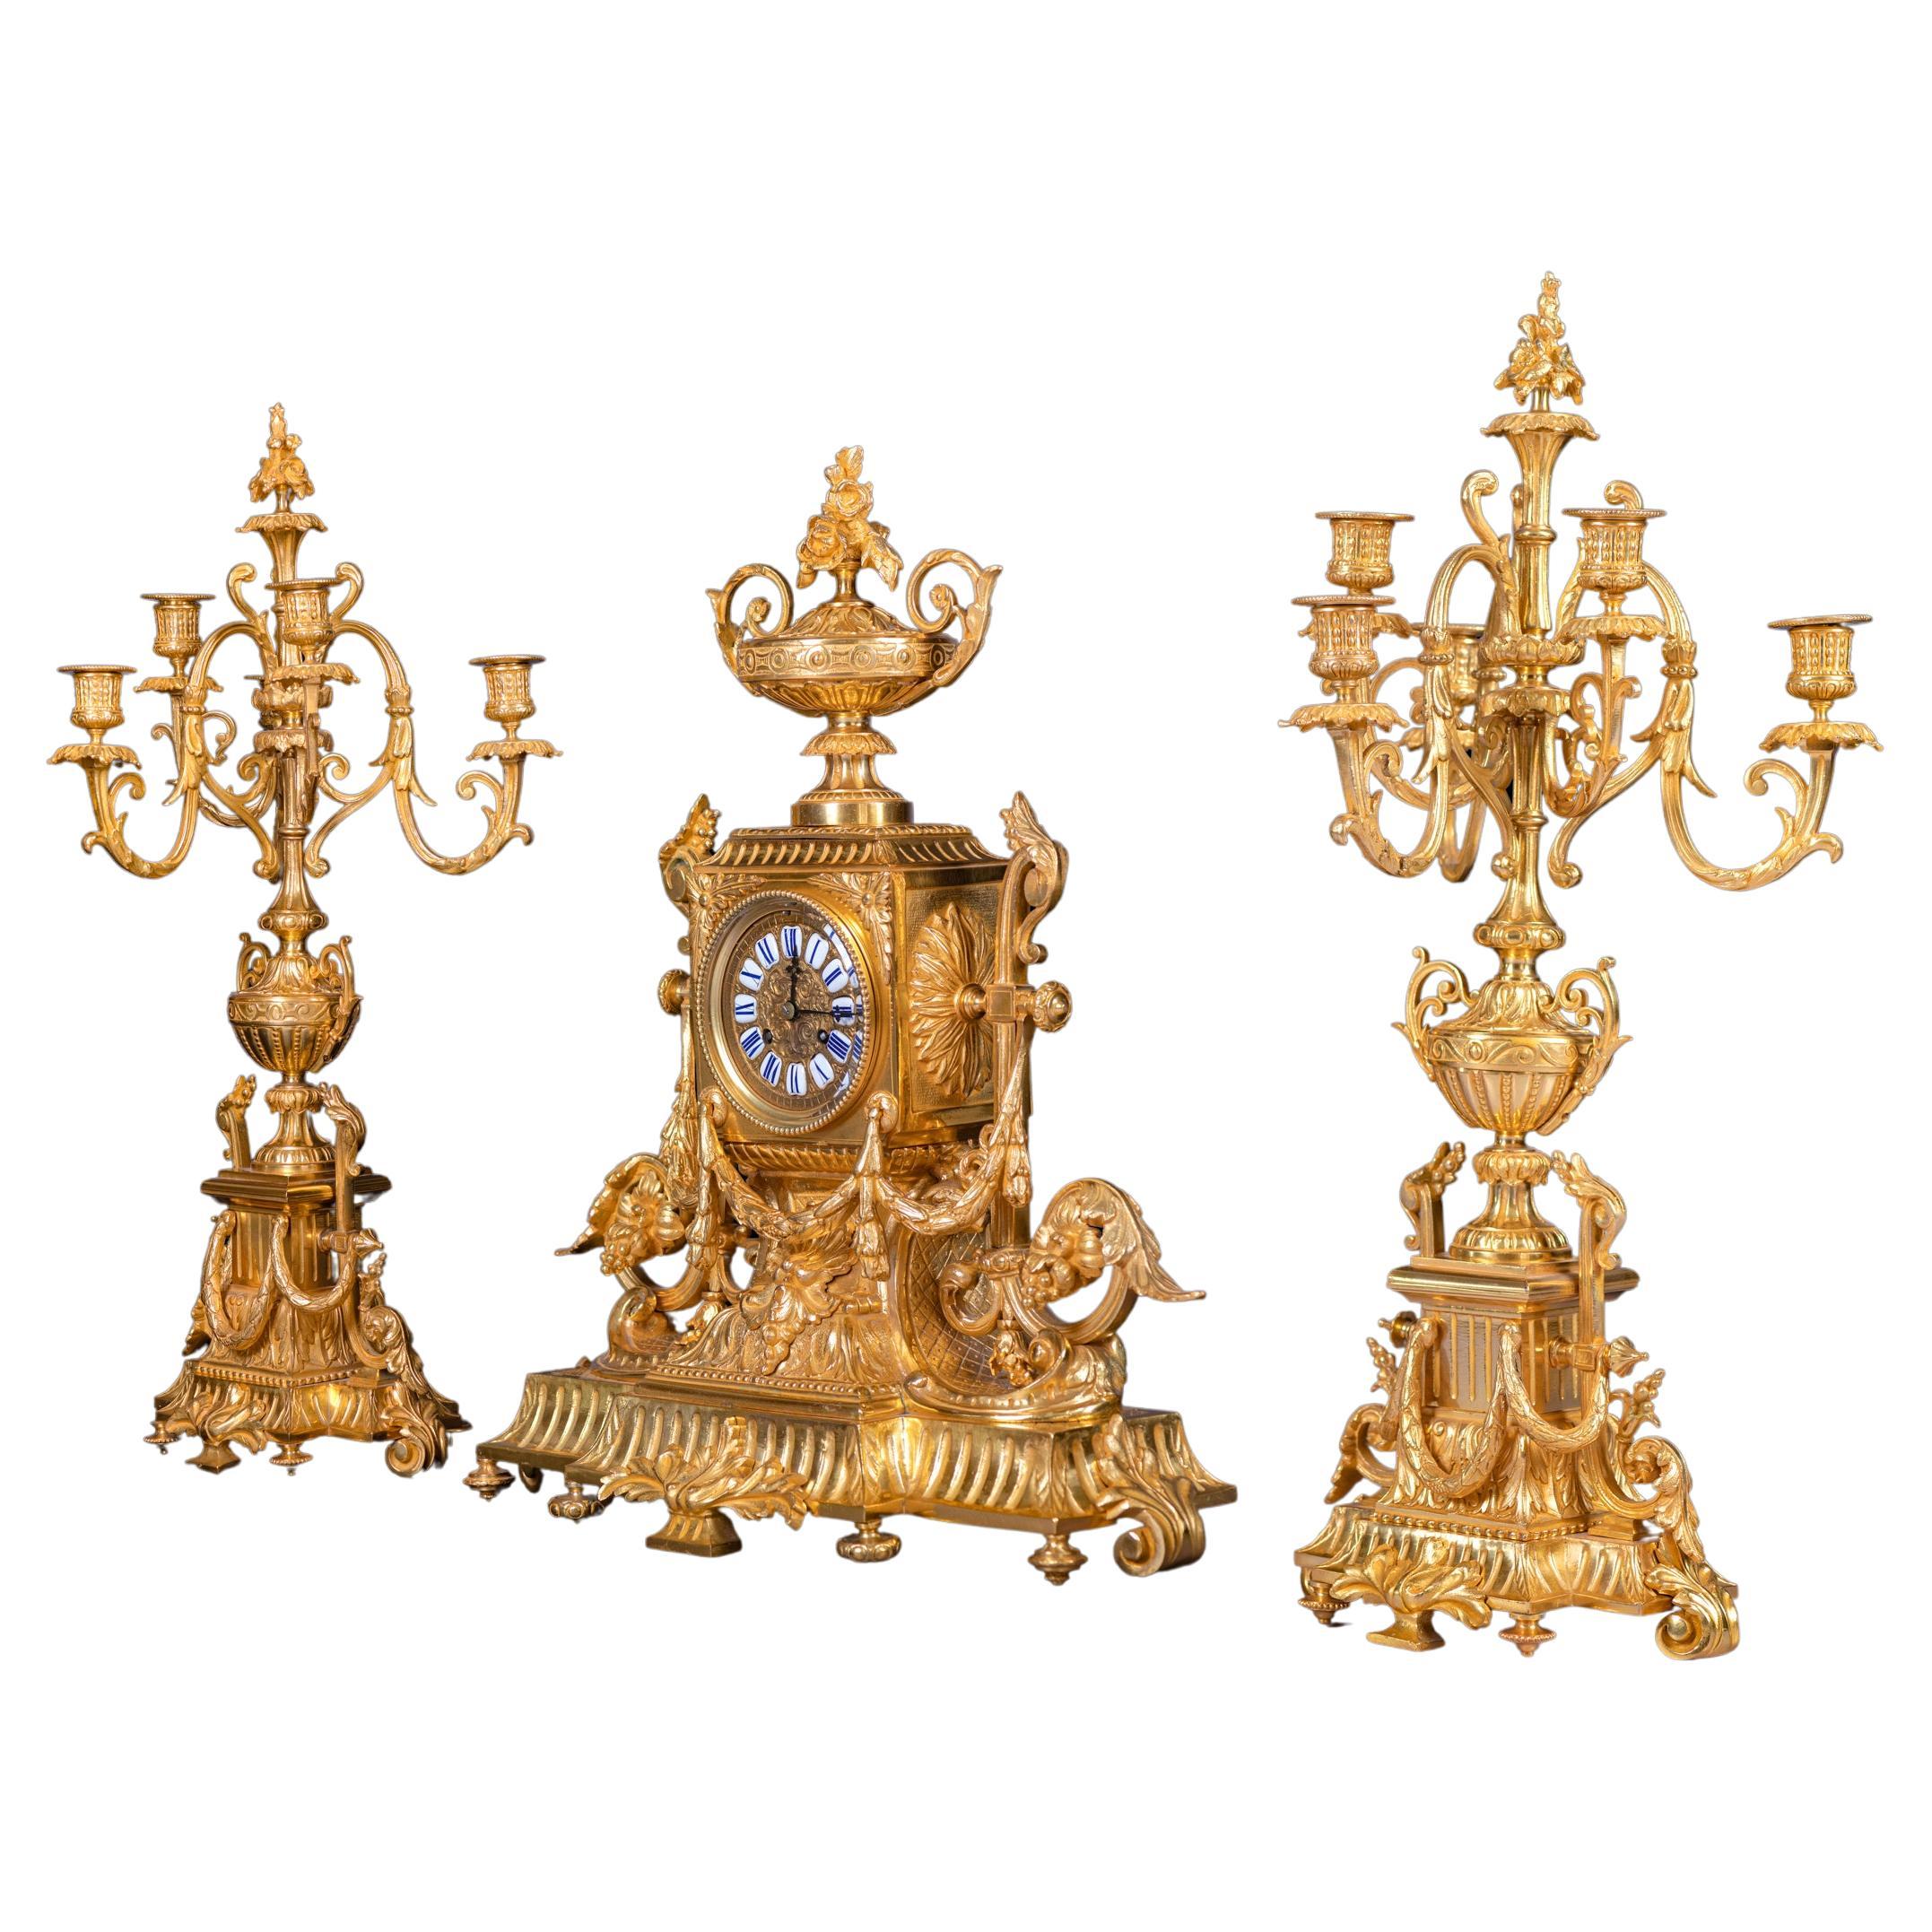 Large 19th Century French Ormolu Clock Garniture in the Louis XVI Style For Sale